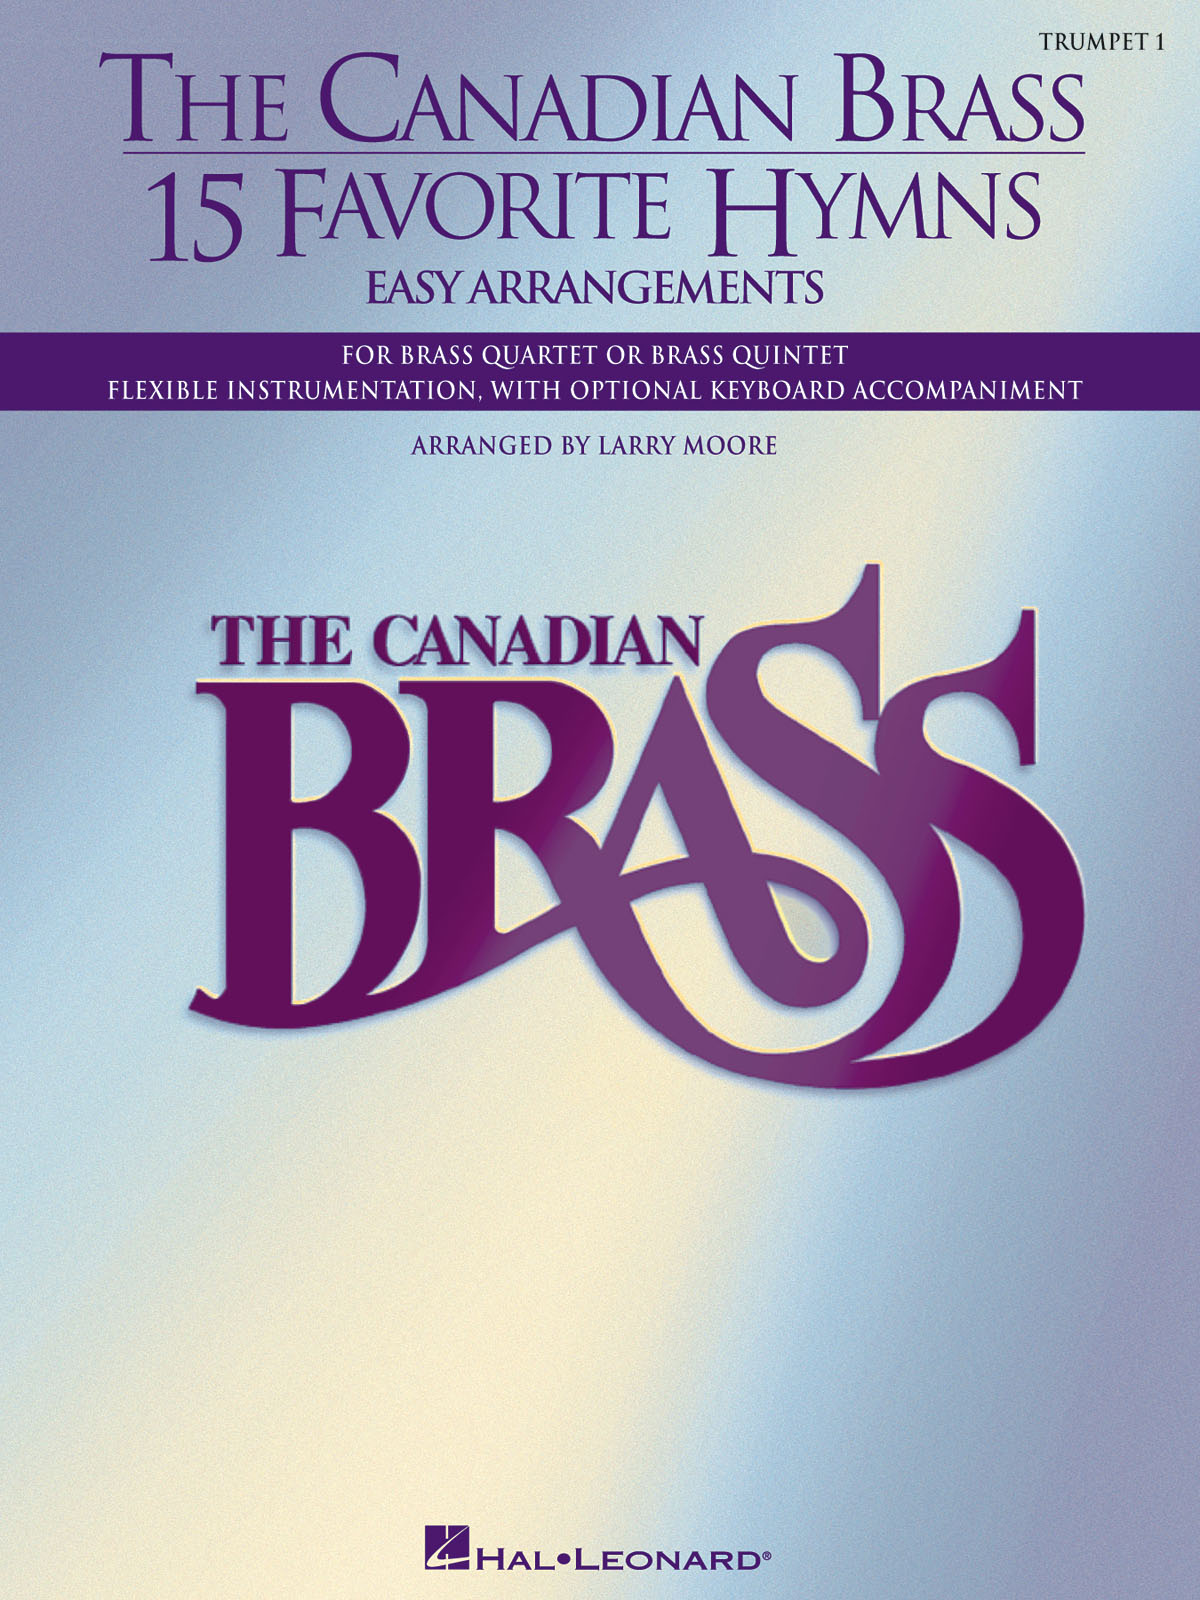 The Canadian Brass 15 Favorite Hymns Trompet 1